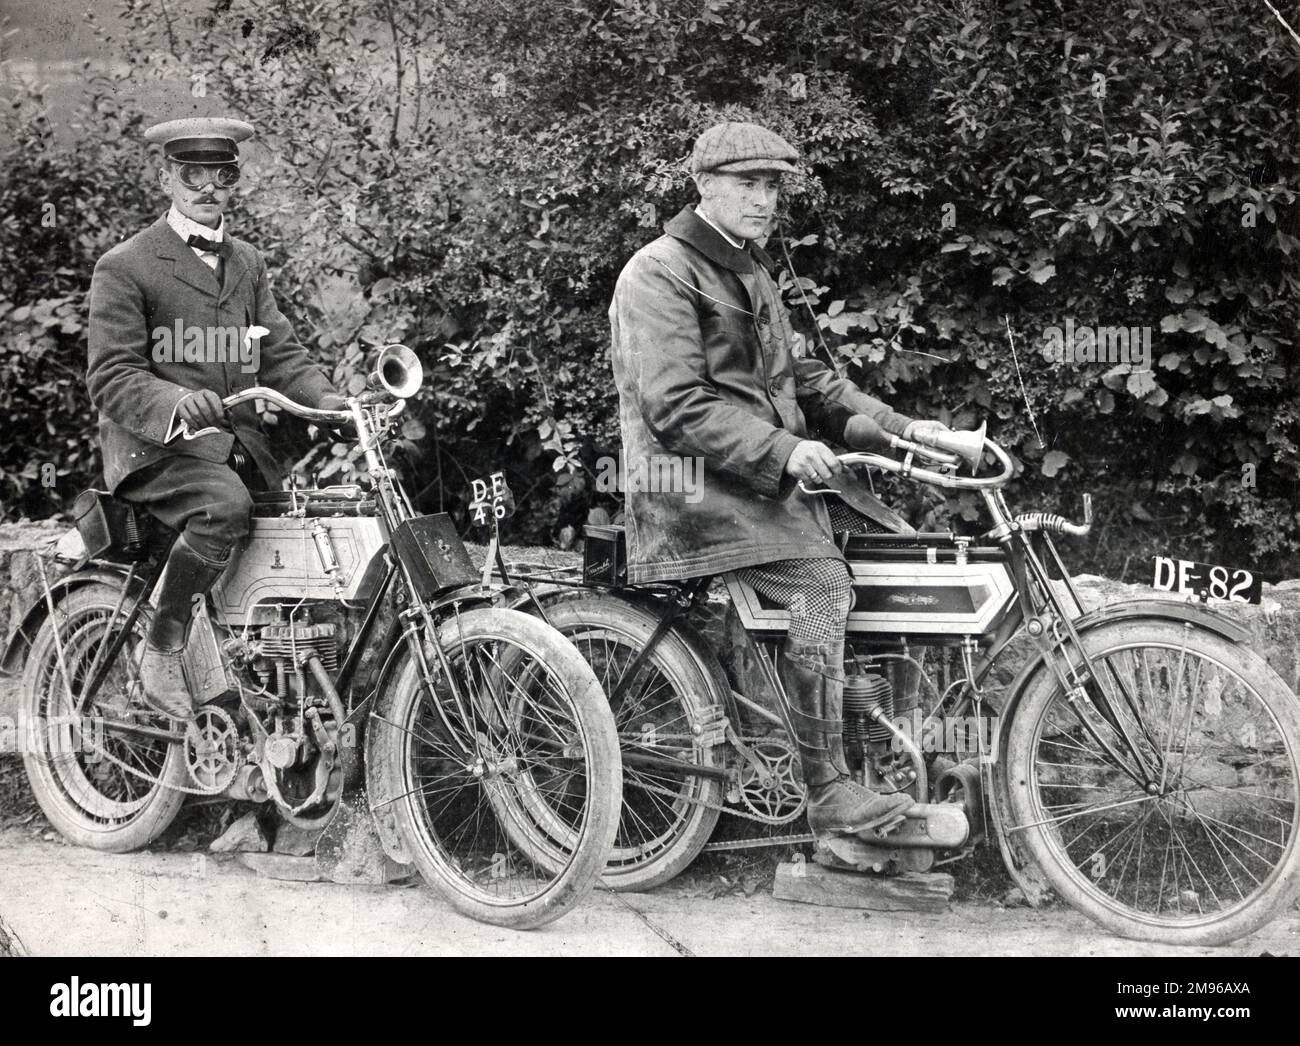 Two Edwardian men on their motor cycles in Pembrokeshire, South Wales.  The man on the right, on a Triumph Imperial, is a member of the Philipps family of Picton Castle.  The man on the left is riding a Raleigh.  The bikes had to be propped up on blocks to avoid wobble during the camera's one-second exposure time. Stock Photo